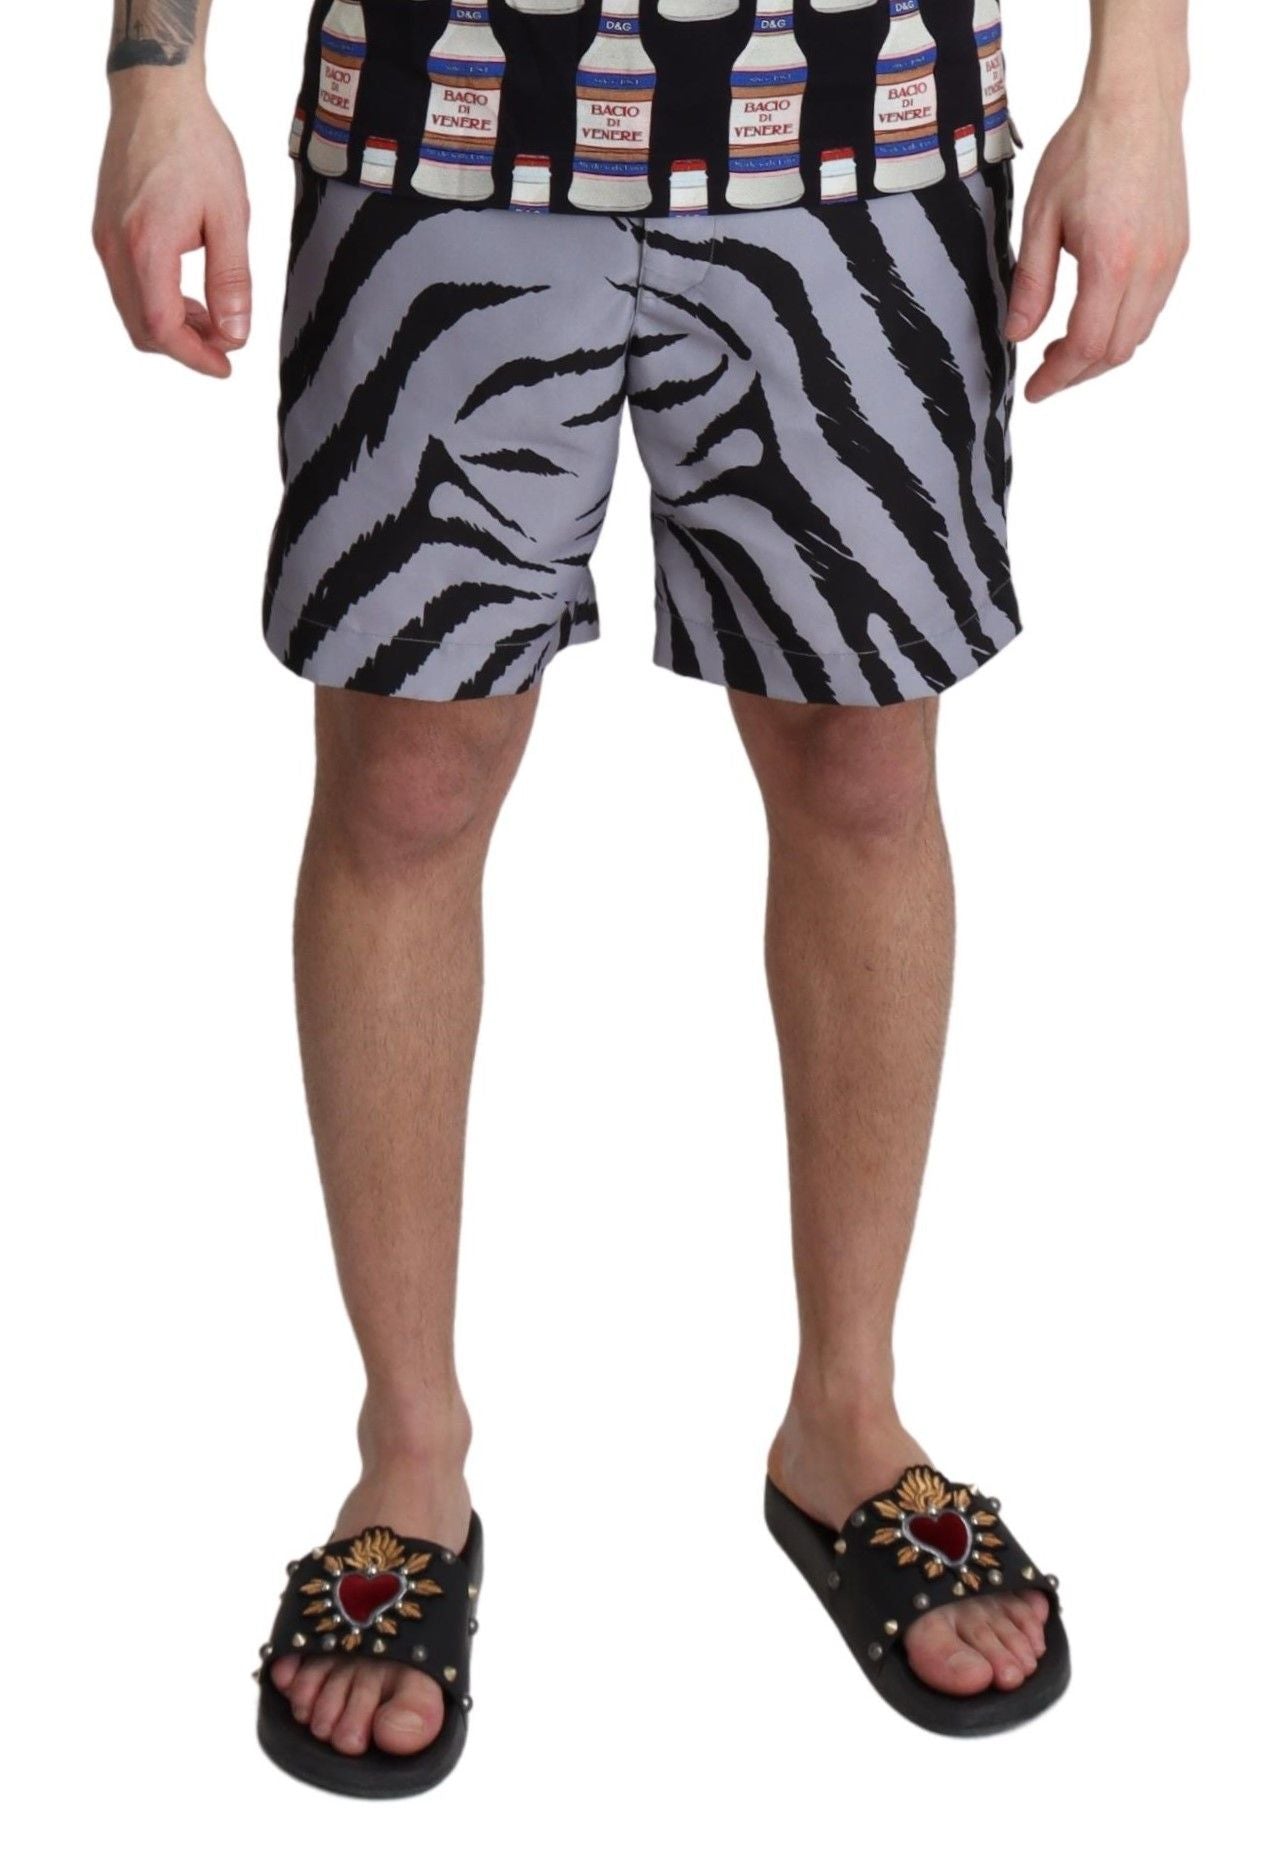 Gray Zebra Print Beachwear Shorts - Designed by Dolce & Gabbana Available to Buy at a Discounted Price on Moon Behind The Hill Online Designer Discount Store